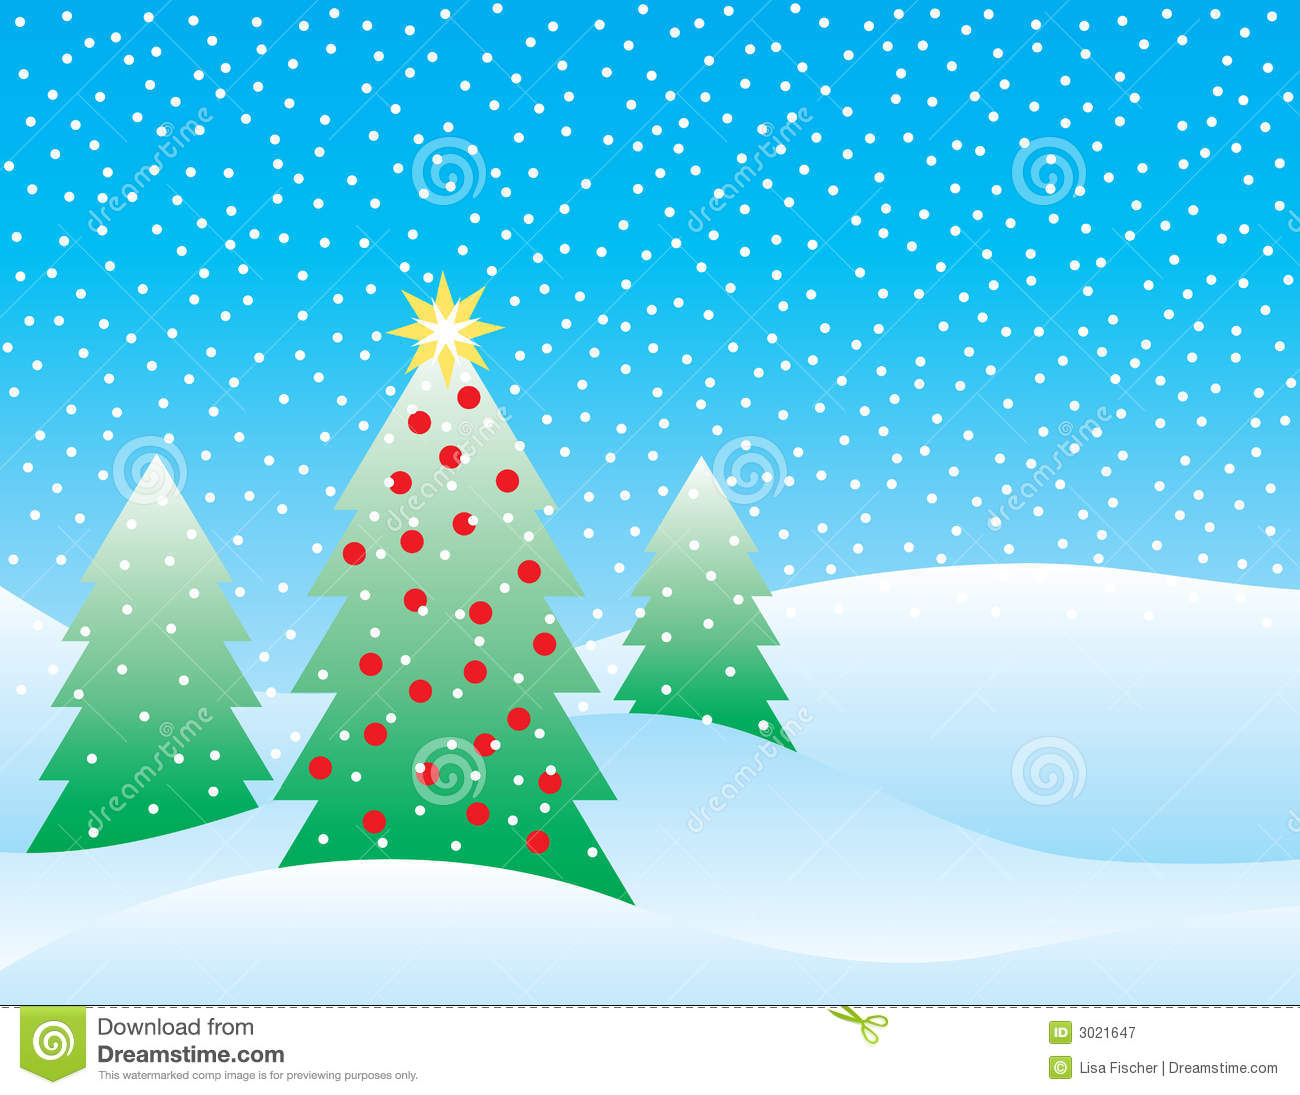 Stylized Illustration Of Three Christmas Trees On A Snowy Background